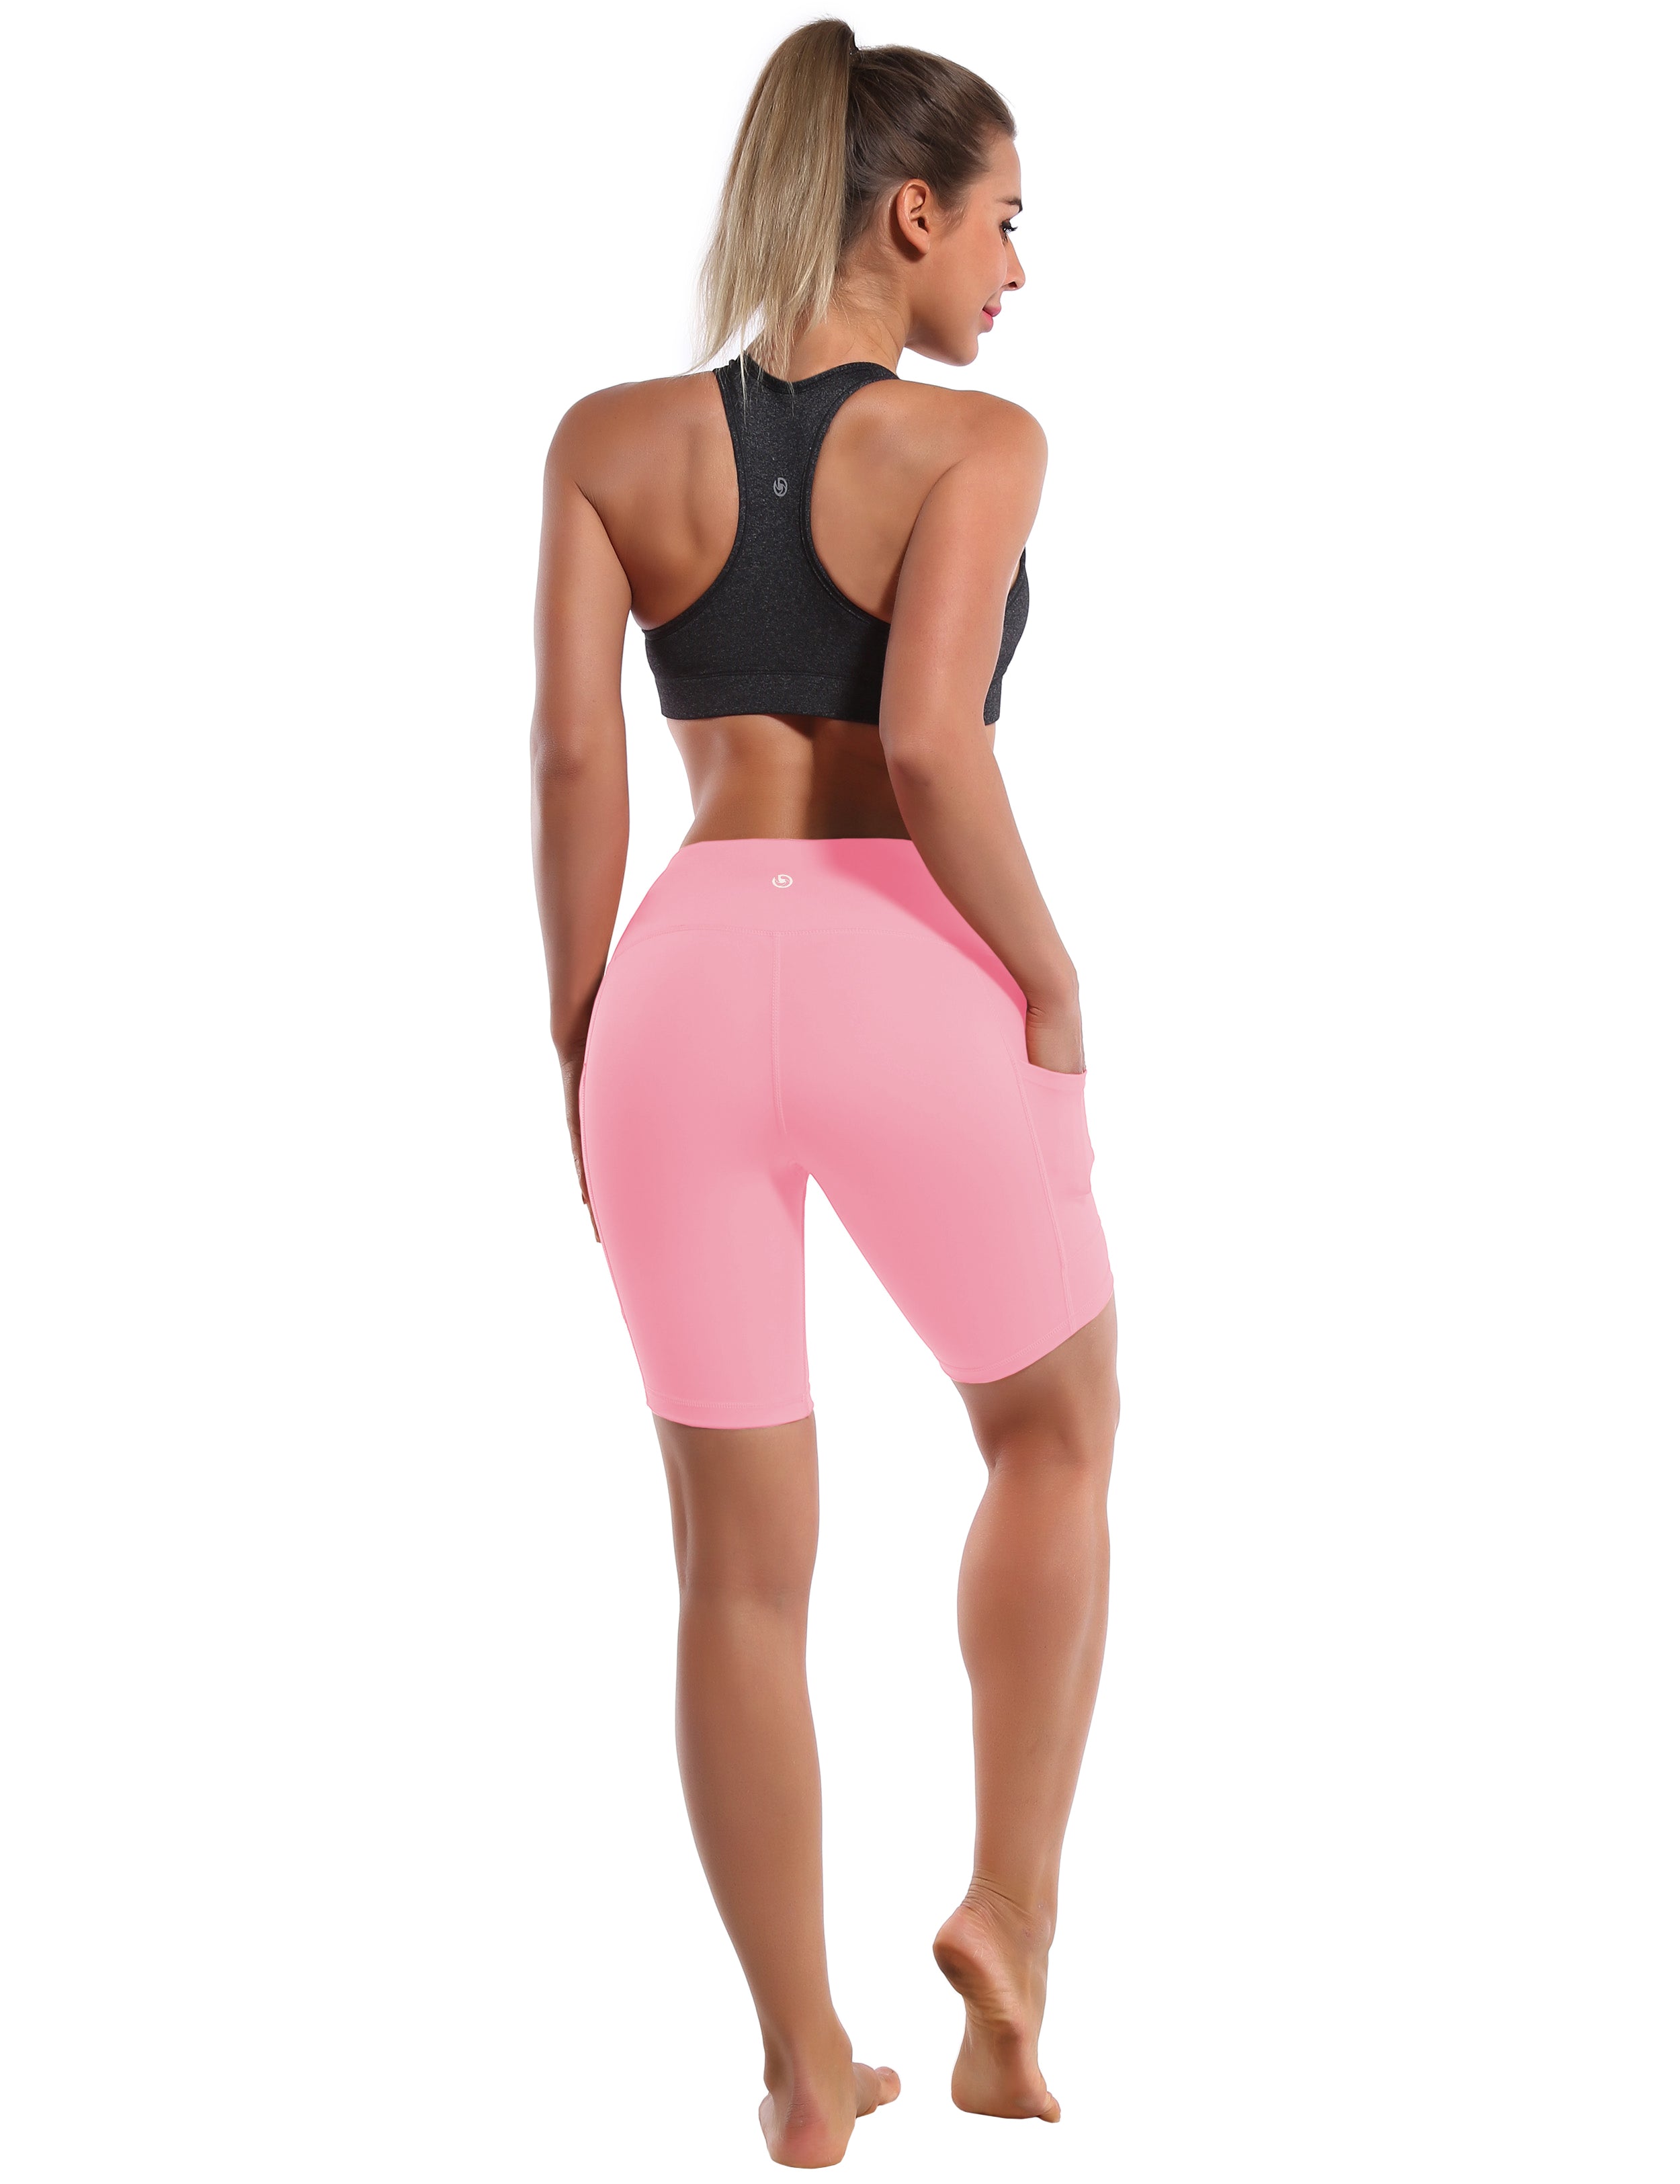 8" Side Pockets Yoga Shorts lemonadepink Sleek, soft, smooth and totally comfortable: our newest style is here. Softest-ever fabric High elasticity High density 4-way stretch Fabric doesn't attract lint easily No see-through Moisture-wicking Machine wash 75% Nylon, 25% Spandex